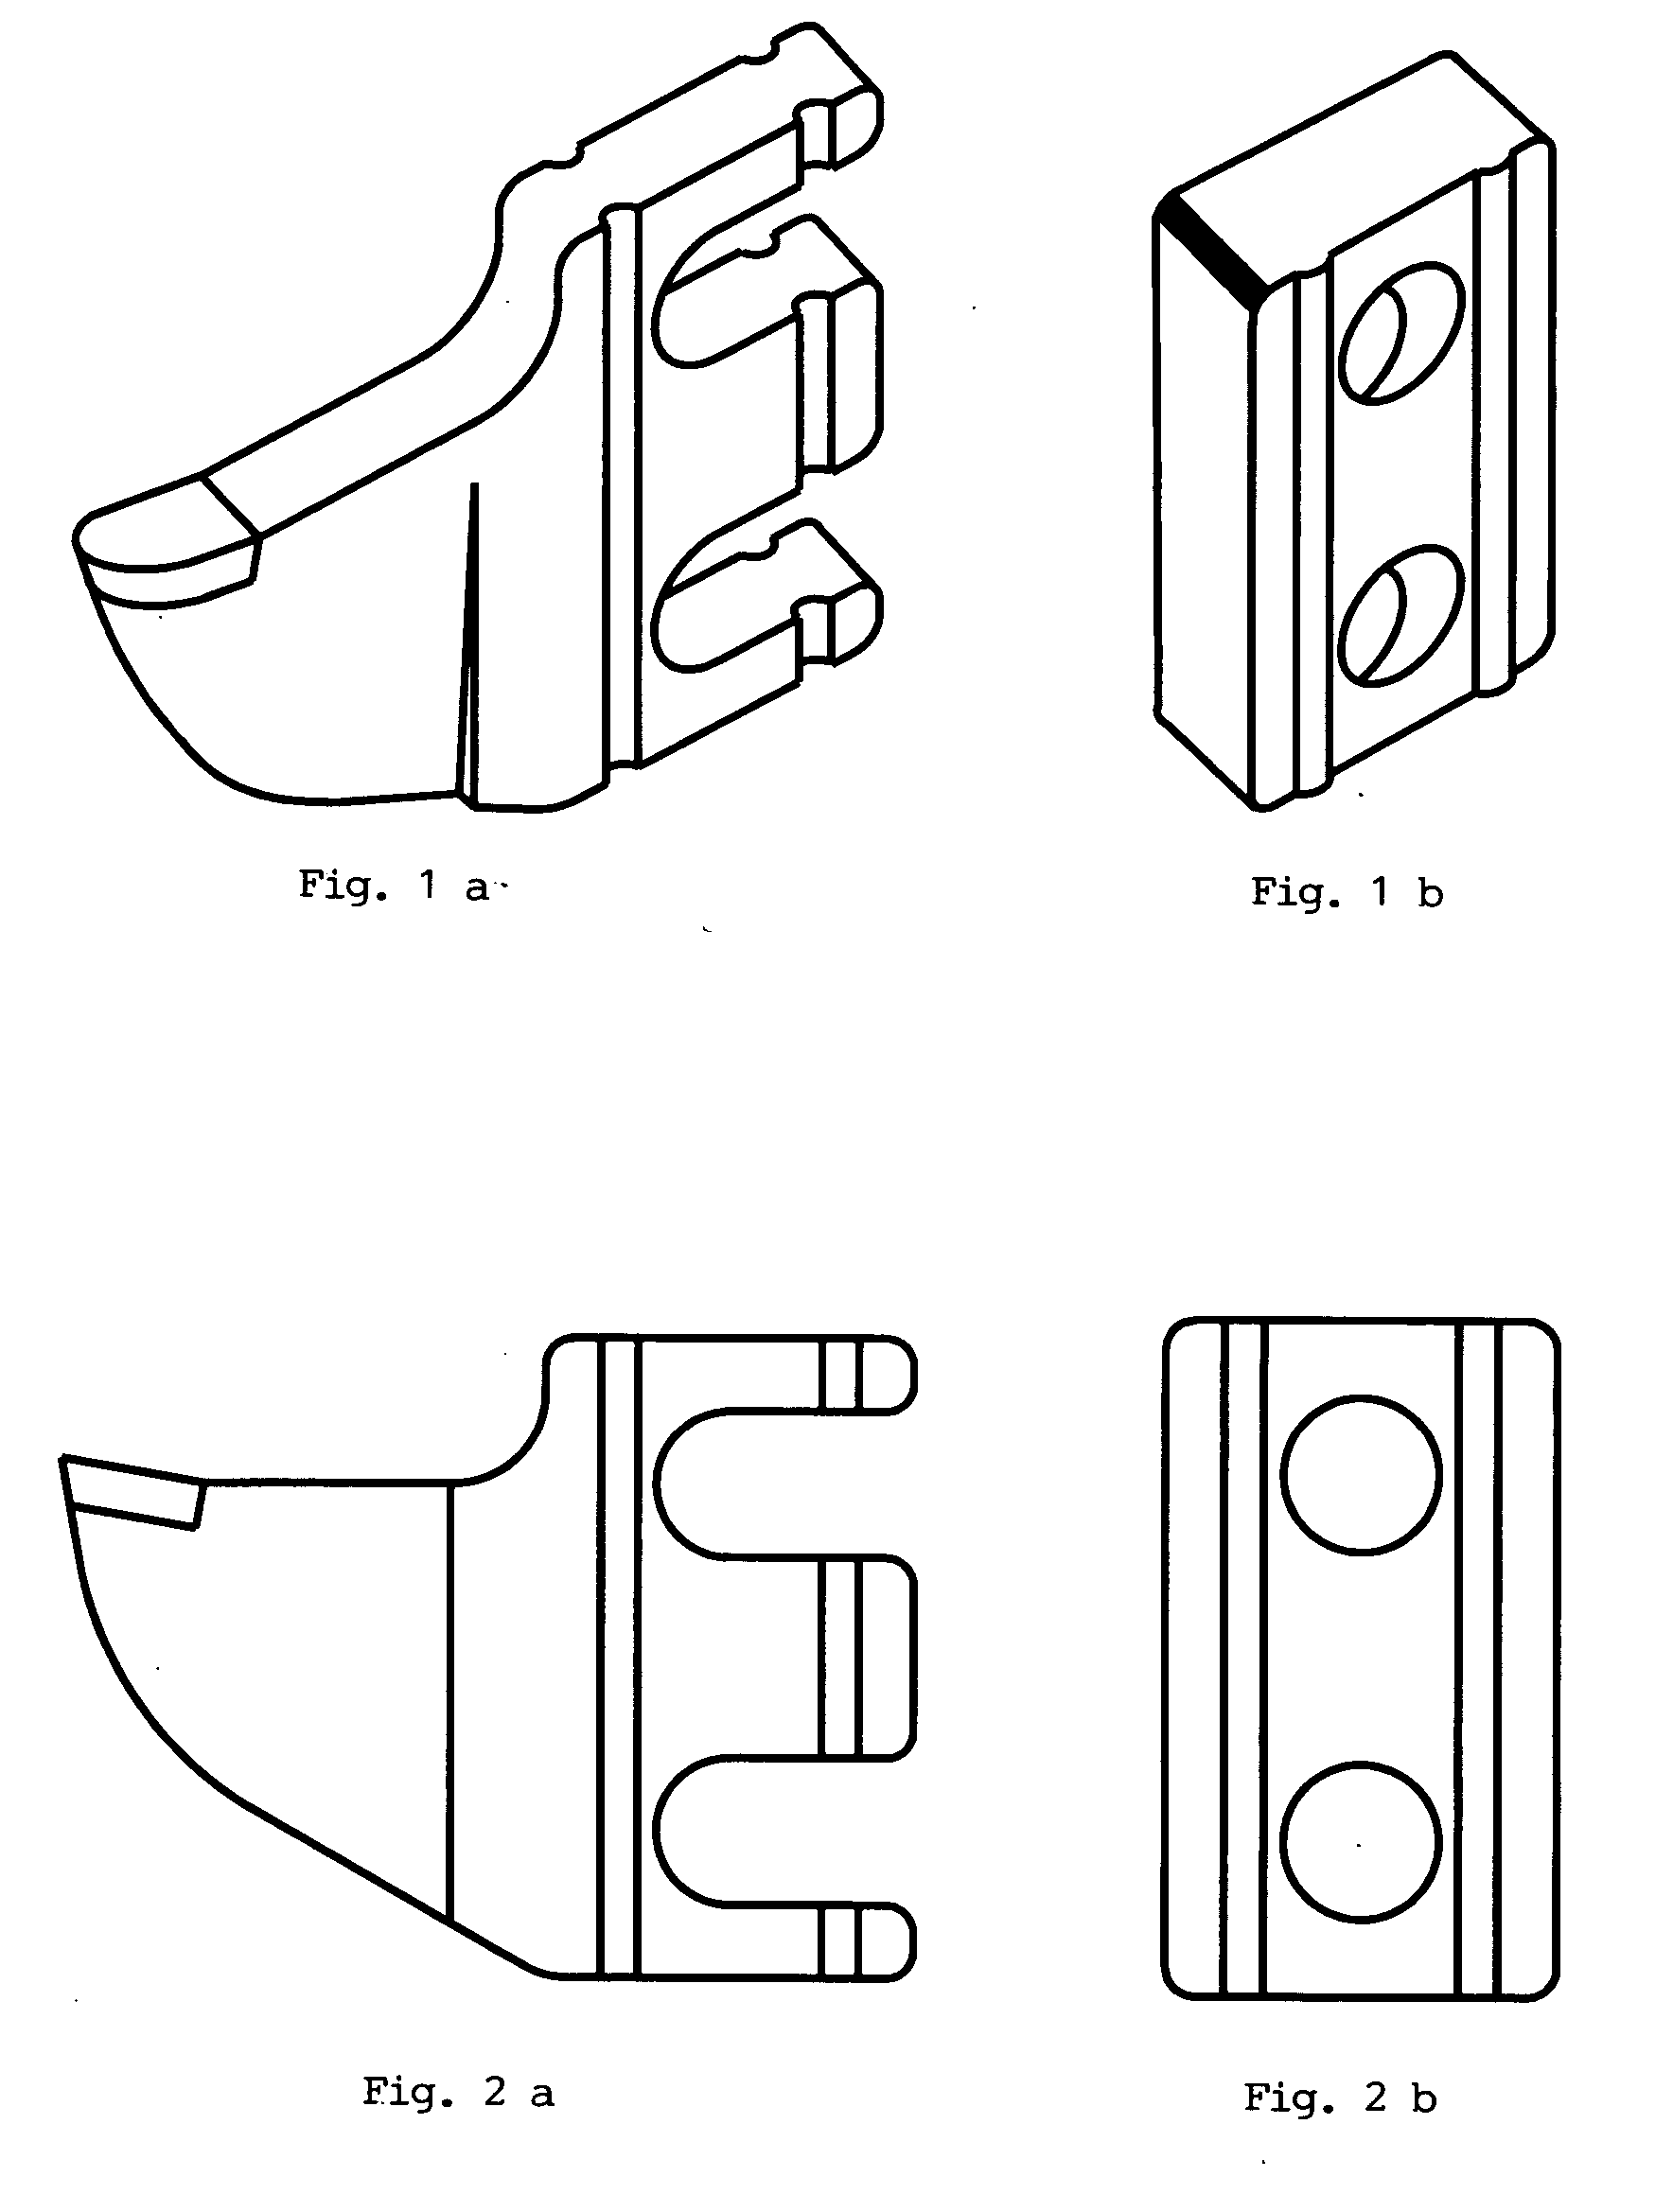 Configurations and designs for stump grinding teeth and corresponding holding